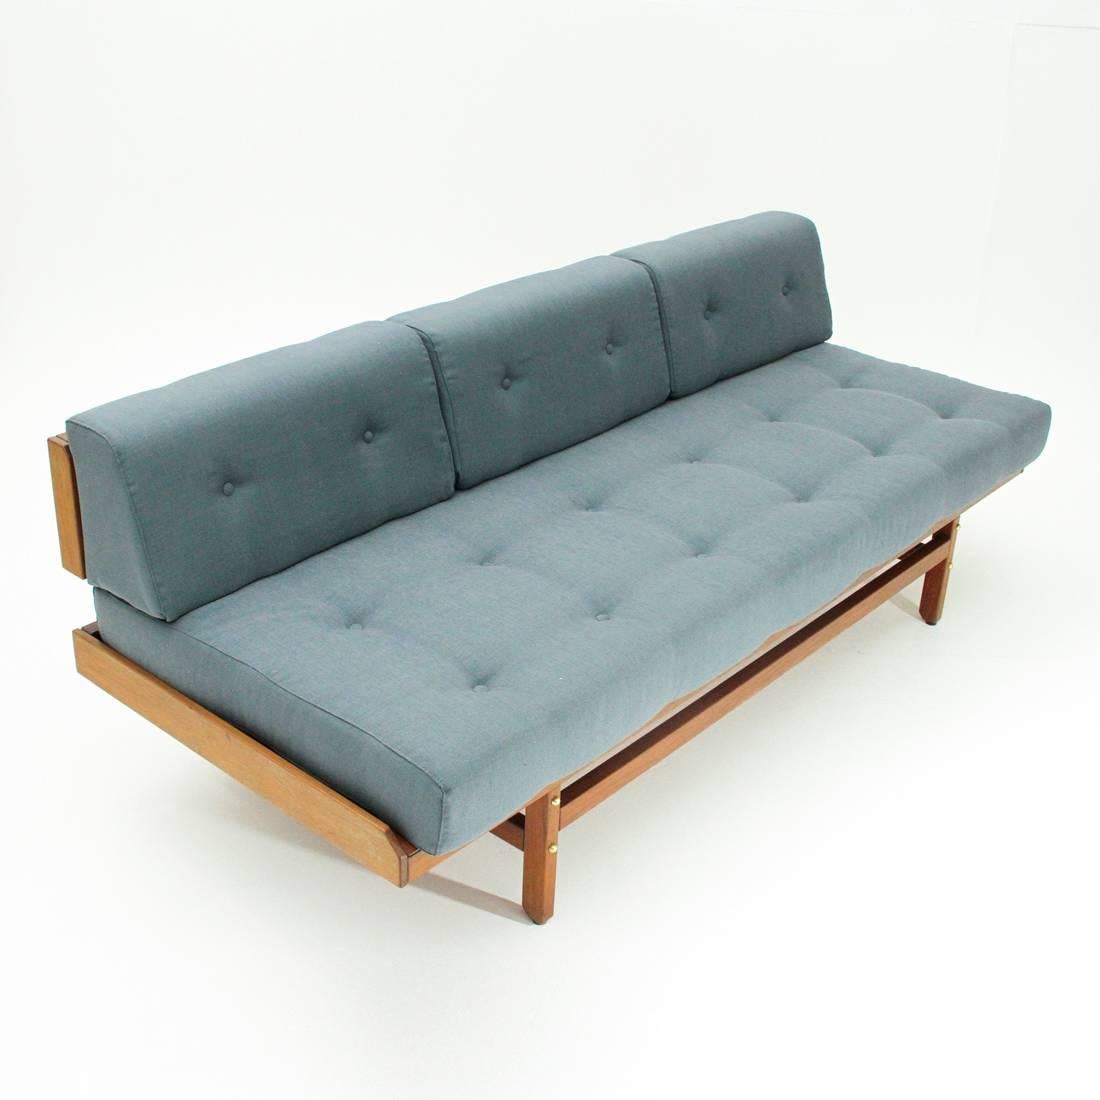 Sofa designed on a private commission by Umberto Brandigi for Poltronova.
Wooden structure.
Seat formed by a padded cushion and lined with new fabric and stitched with buttons.
Backrest formed by three padded cushions and lined with new